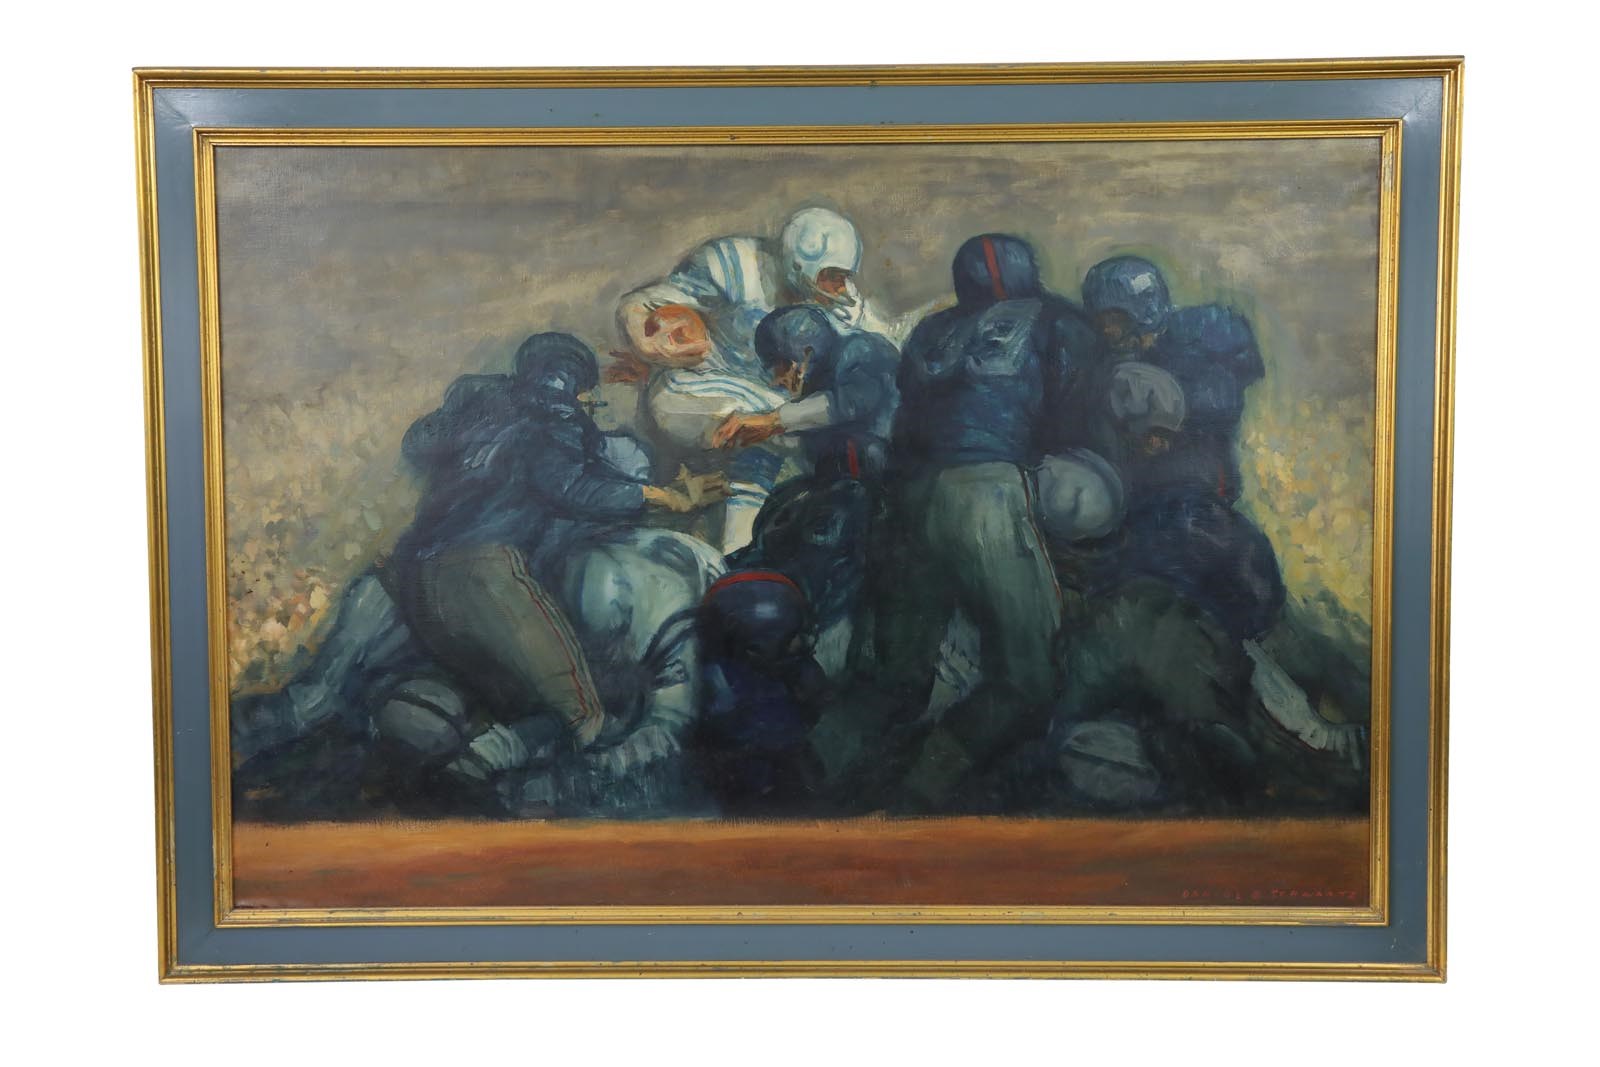 Football - 1958 "Greatest Game Ever Played" Oil on Canvas by Daniel Schwartz - Published in 1960 Esquire